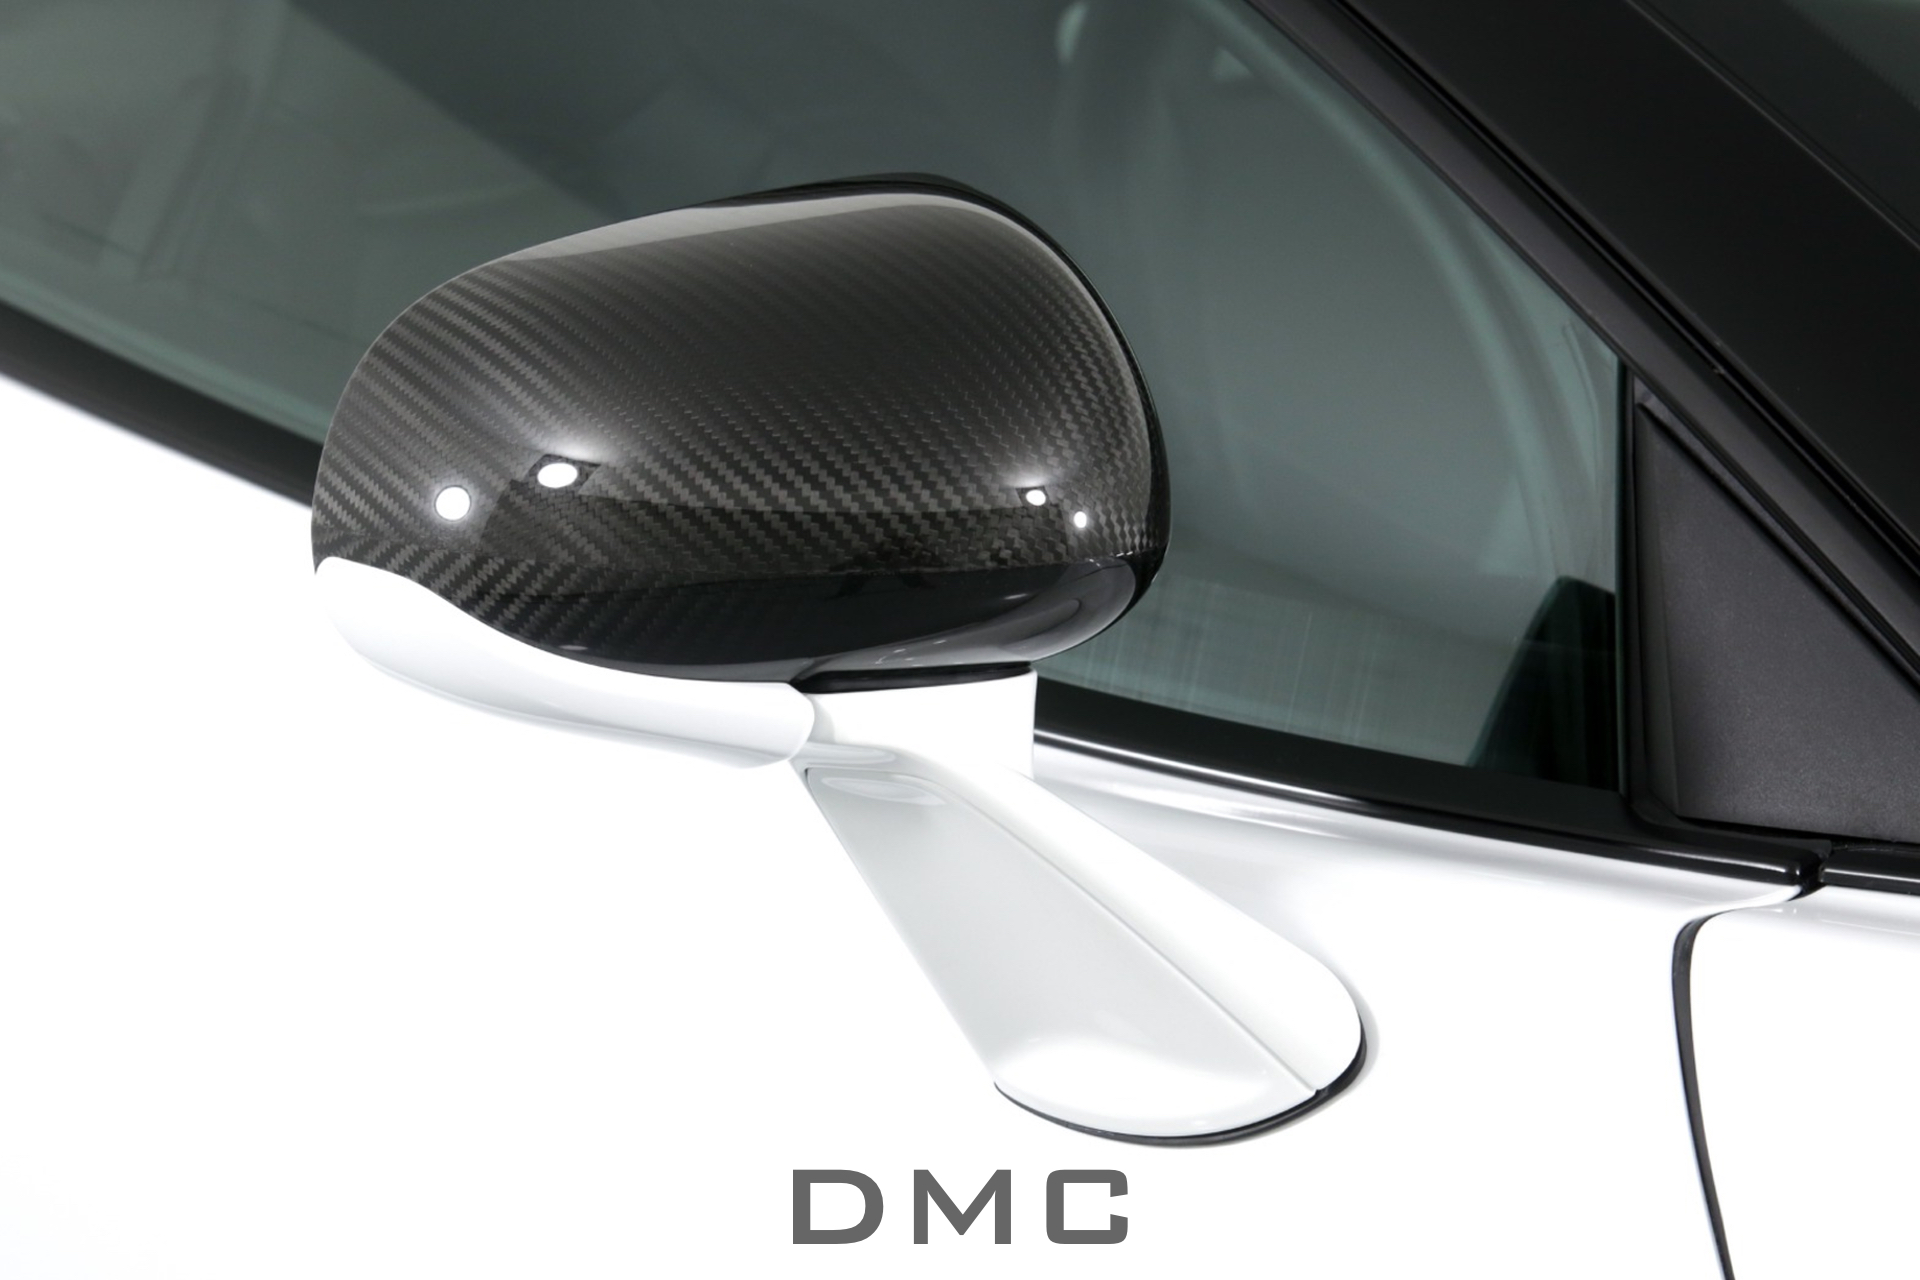 McLaren GT Forged Carbon Fiber Side Mirror Casings, Replacements for the  OEM Side Mirror Housing Covers - DMC